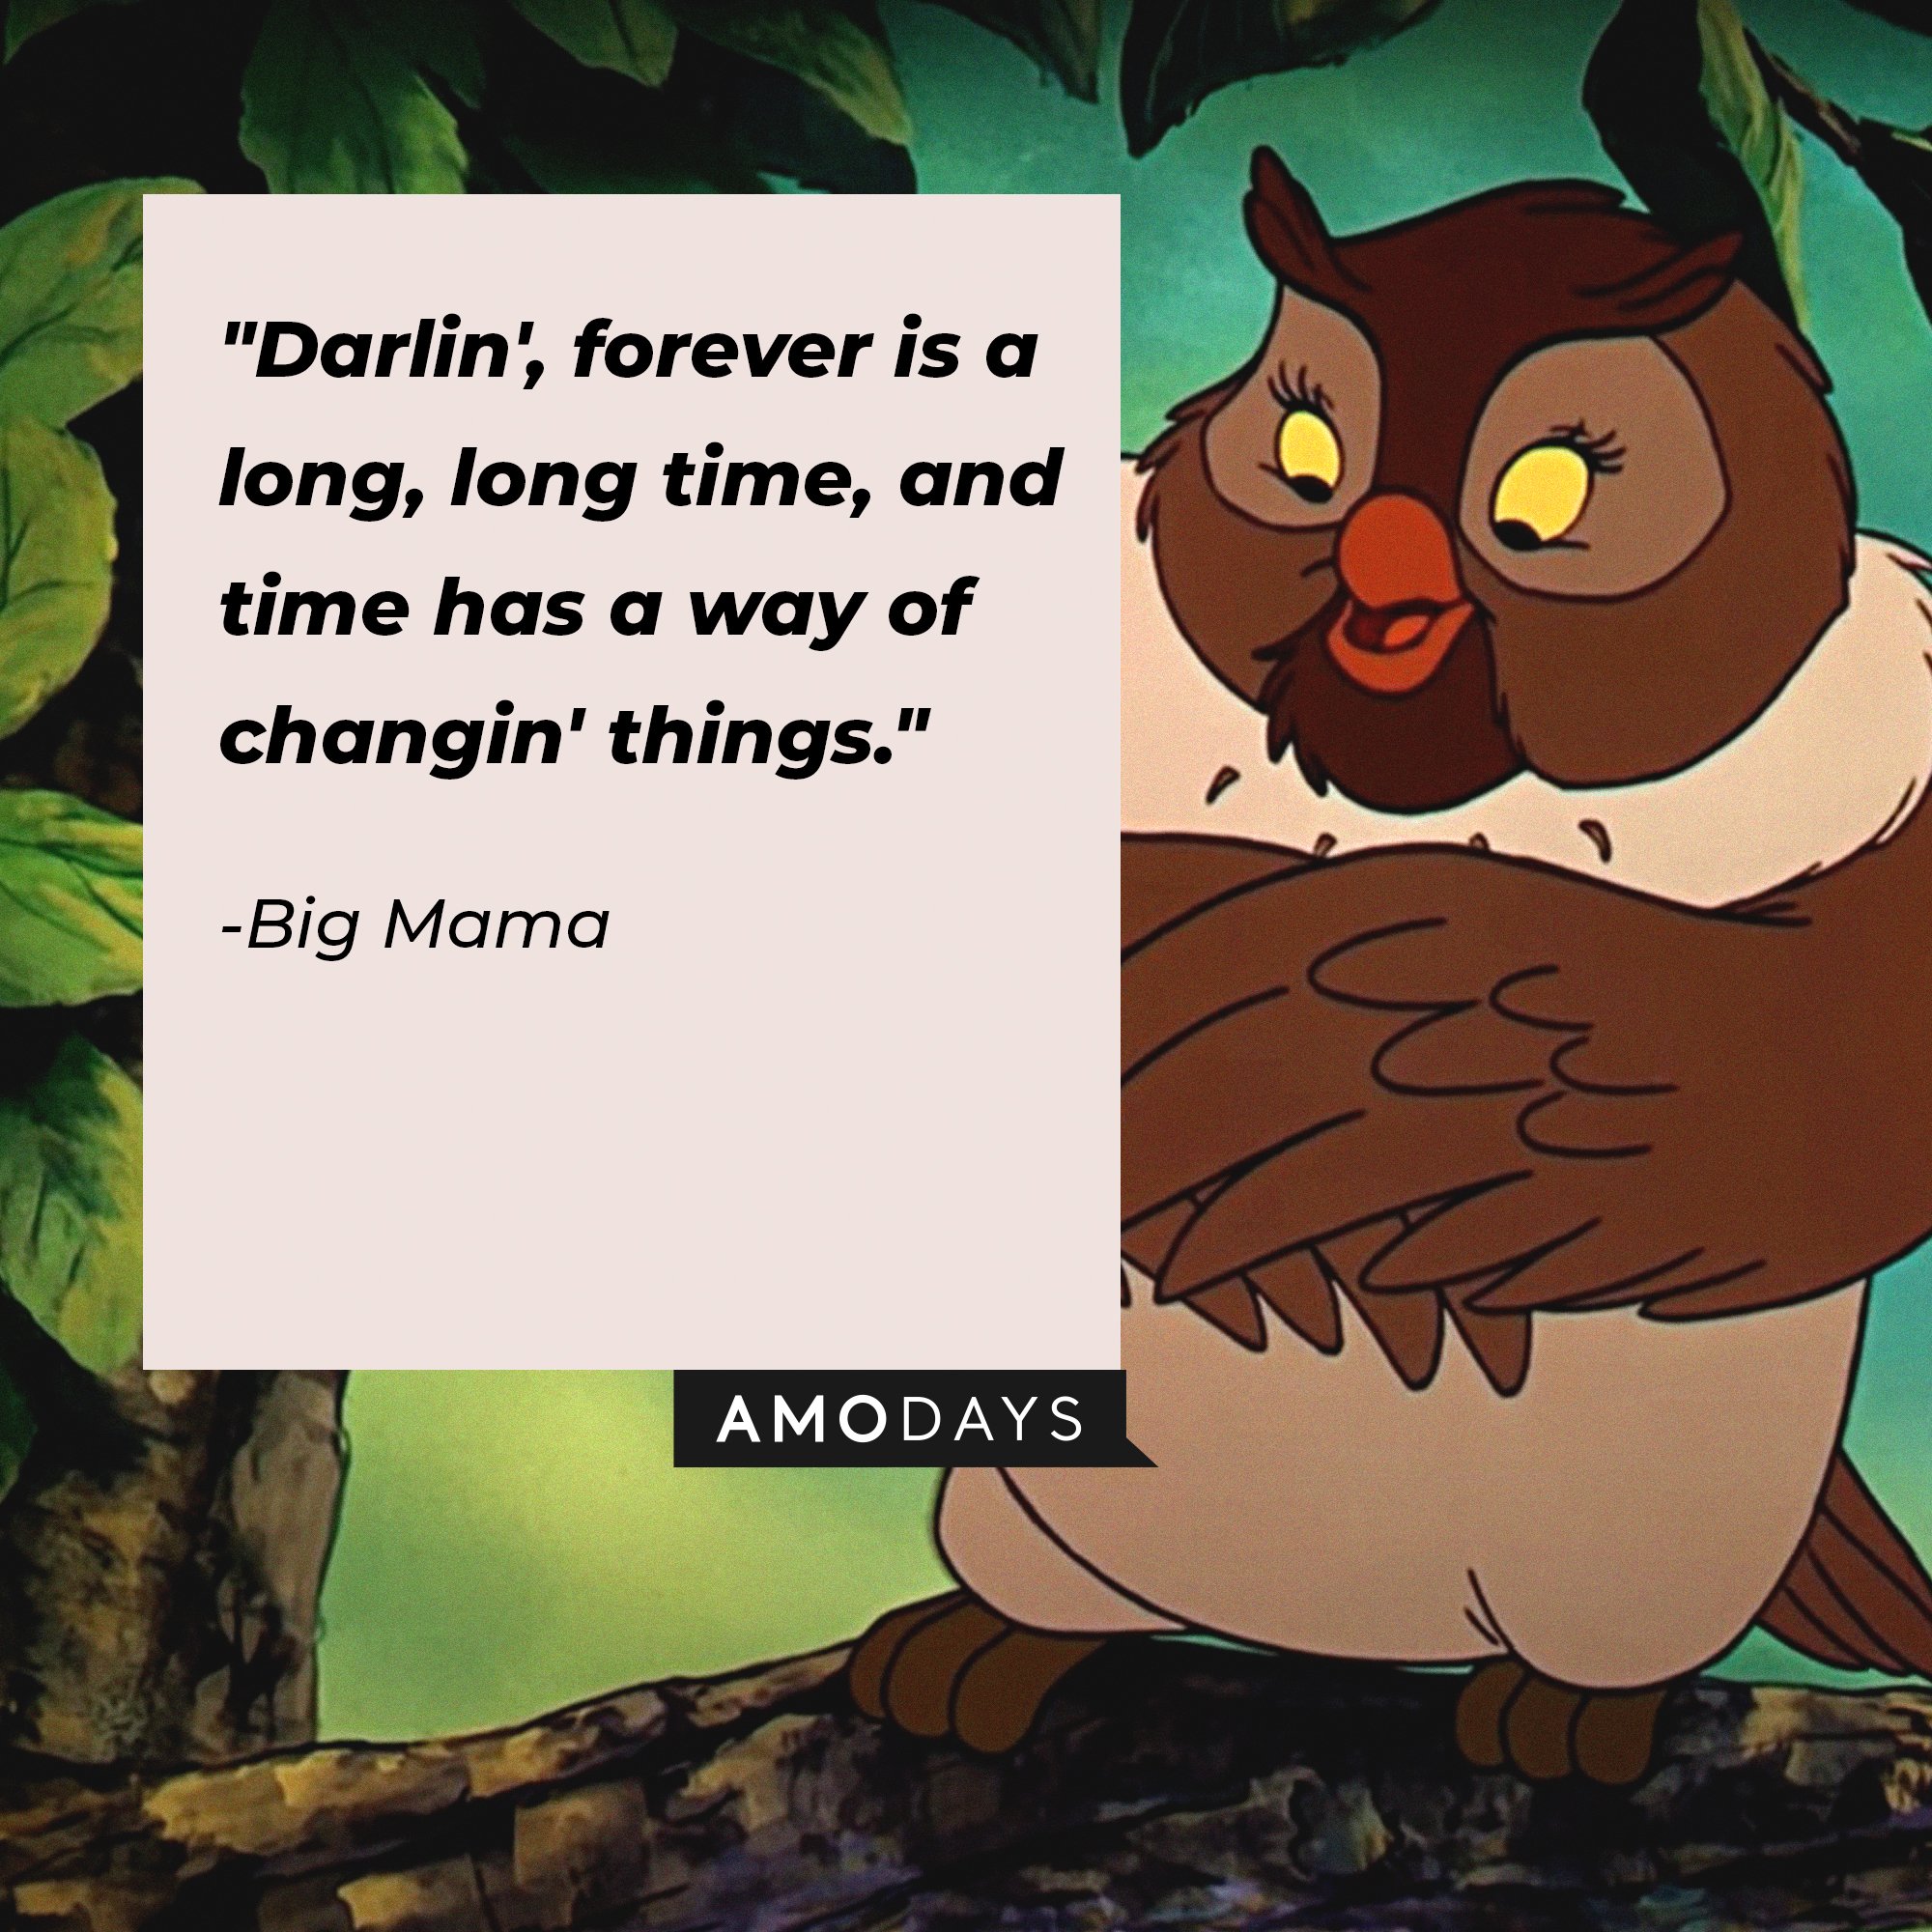 Big Mama’s quote: "Darlin', forever is a long, long time, and time has a way of changin' things." |  Image: AmoDays